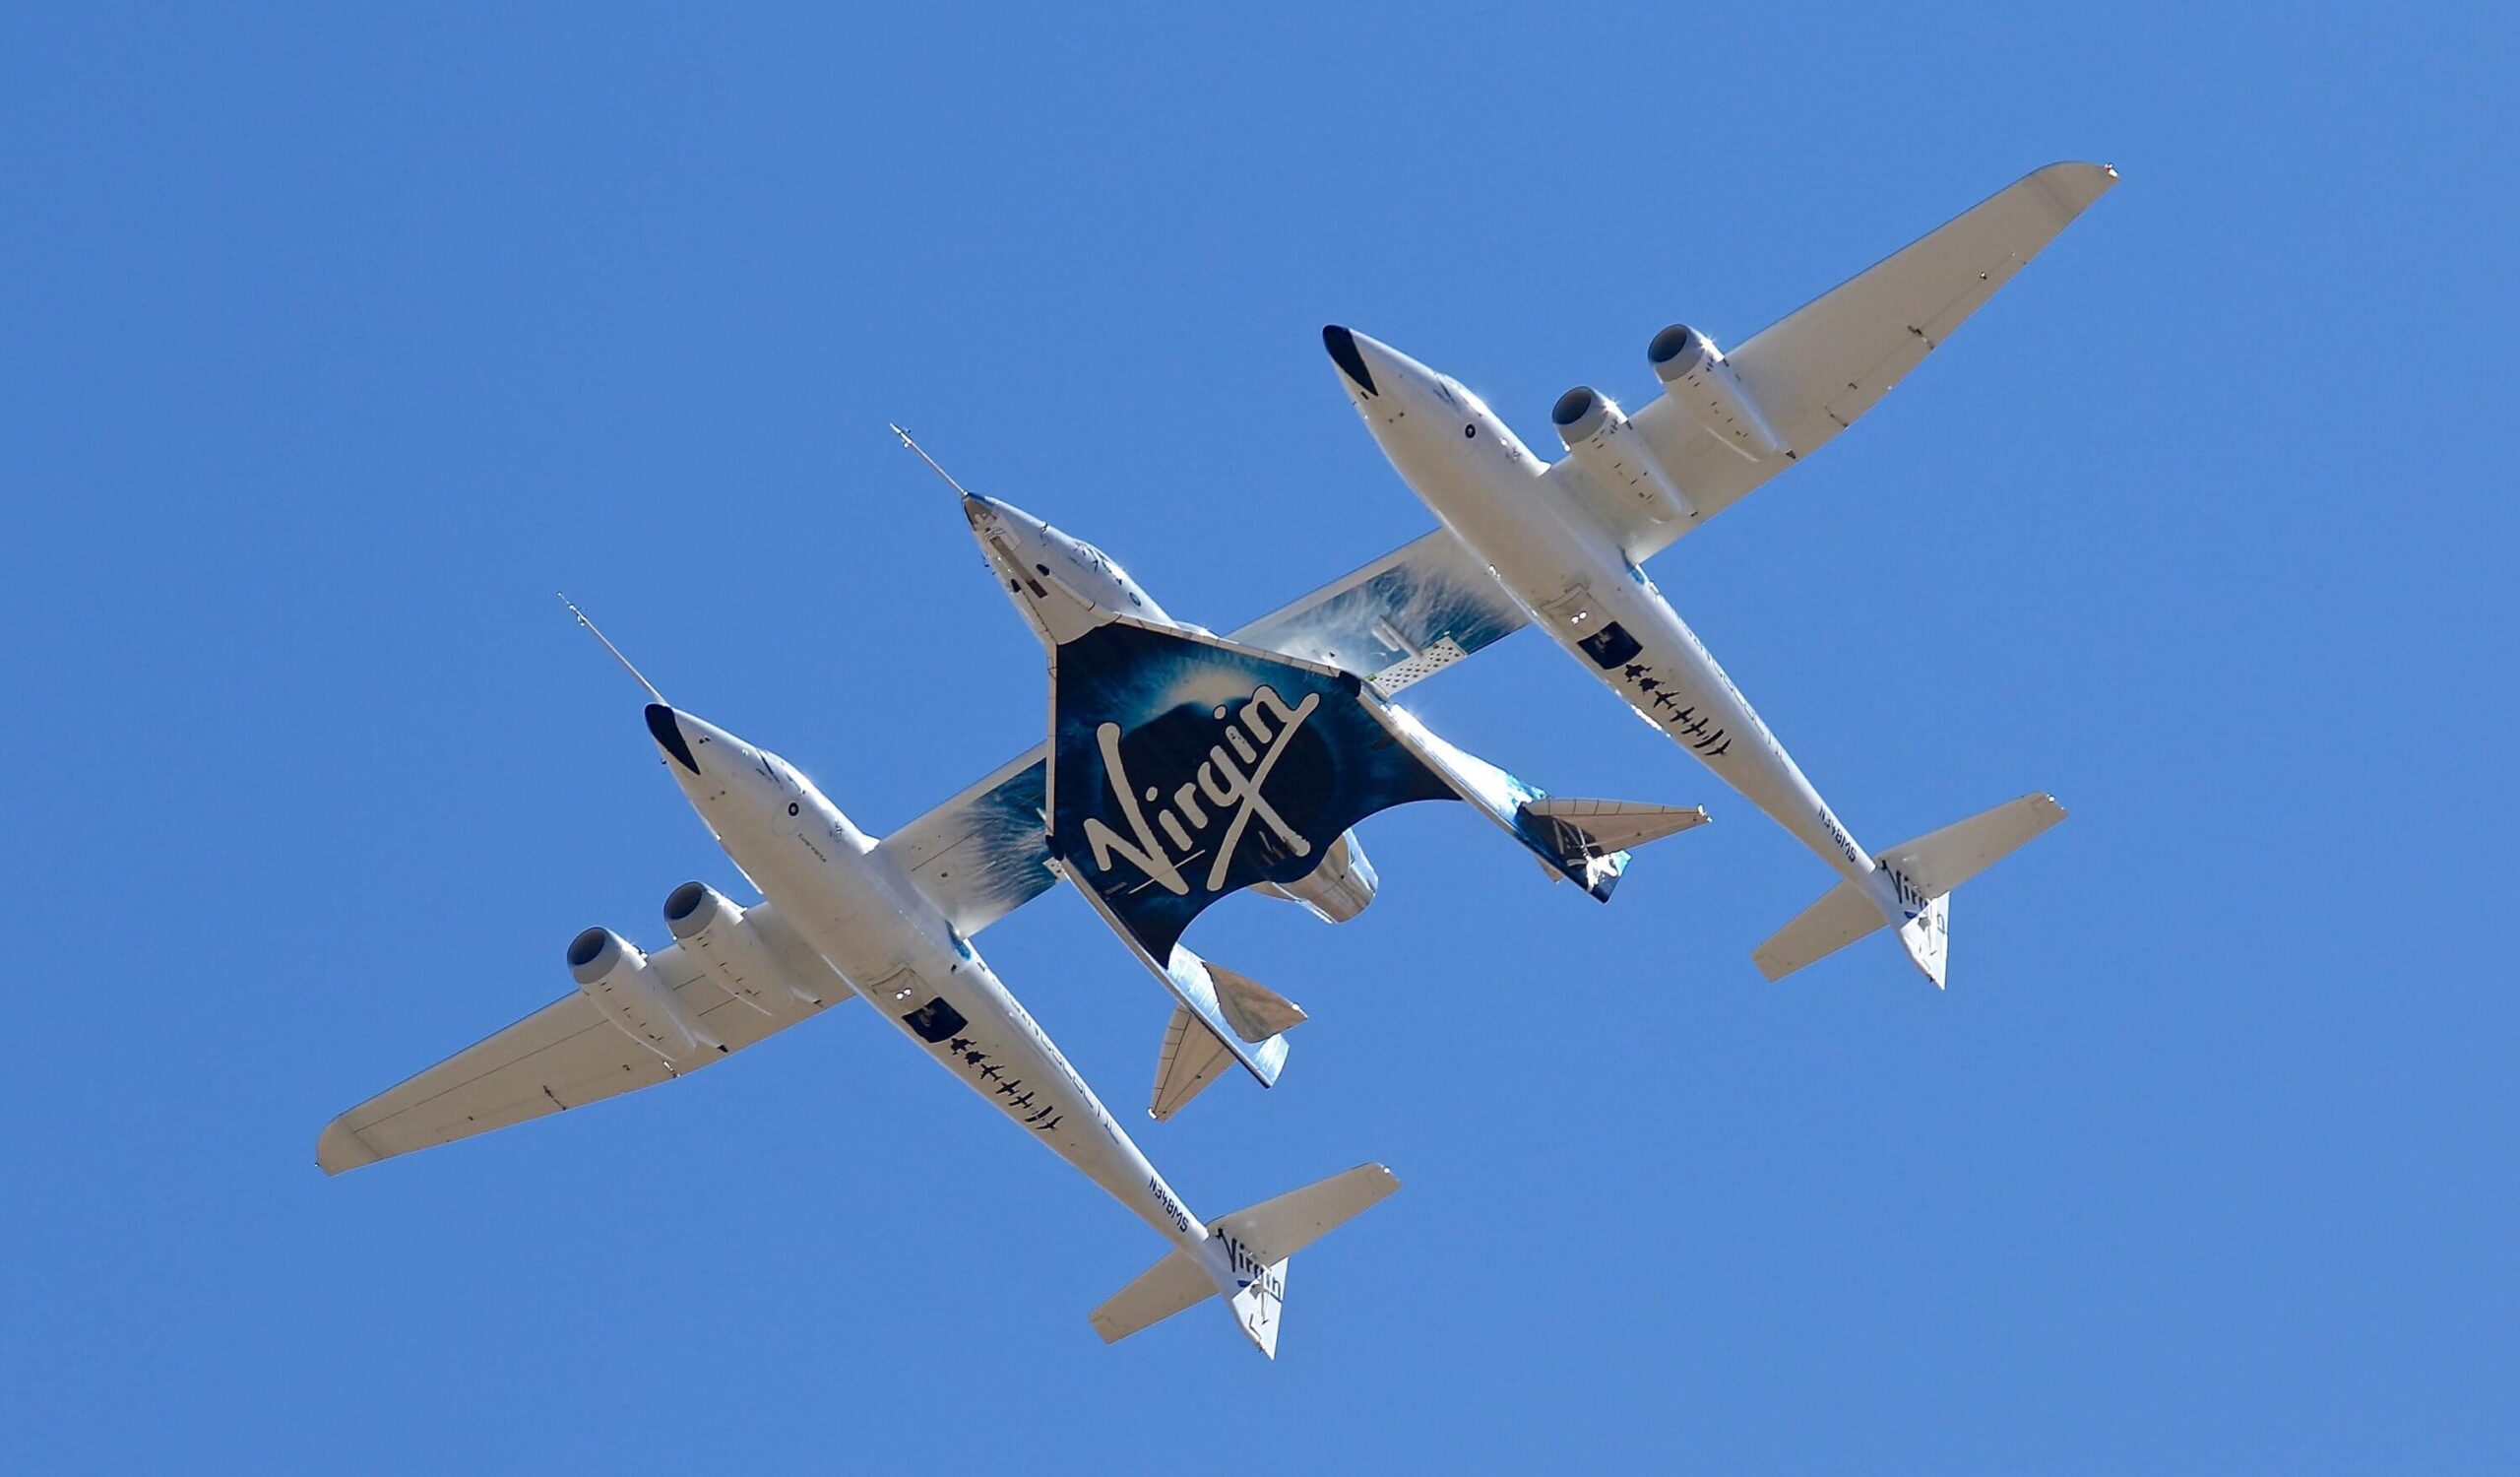 Virgin Galactic’s flight reaches edge of space, becoming first company to carry passengers into space